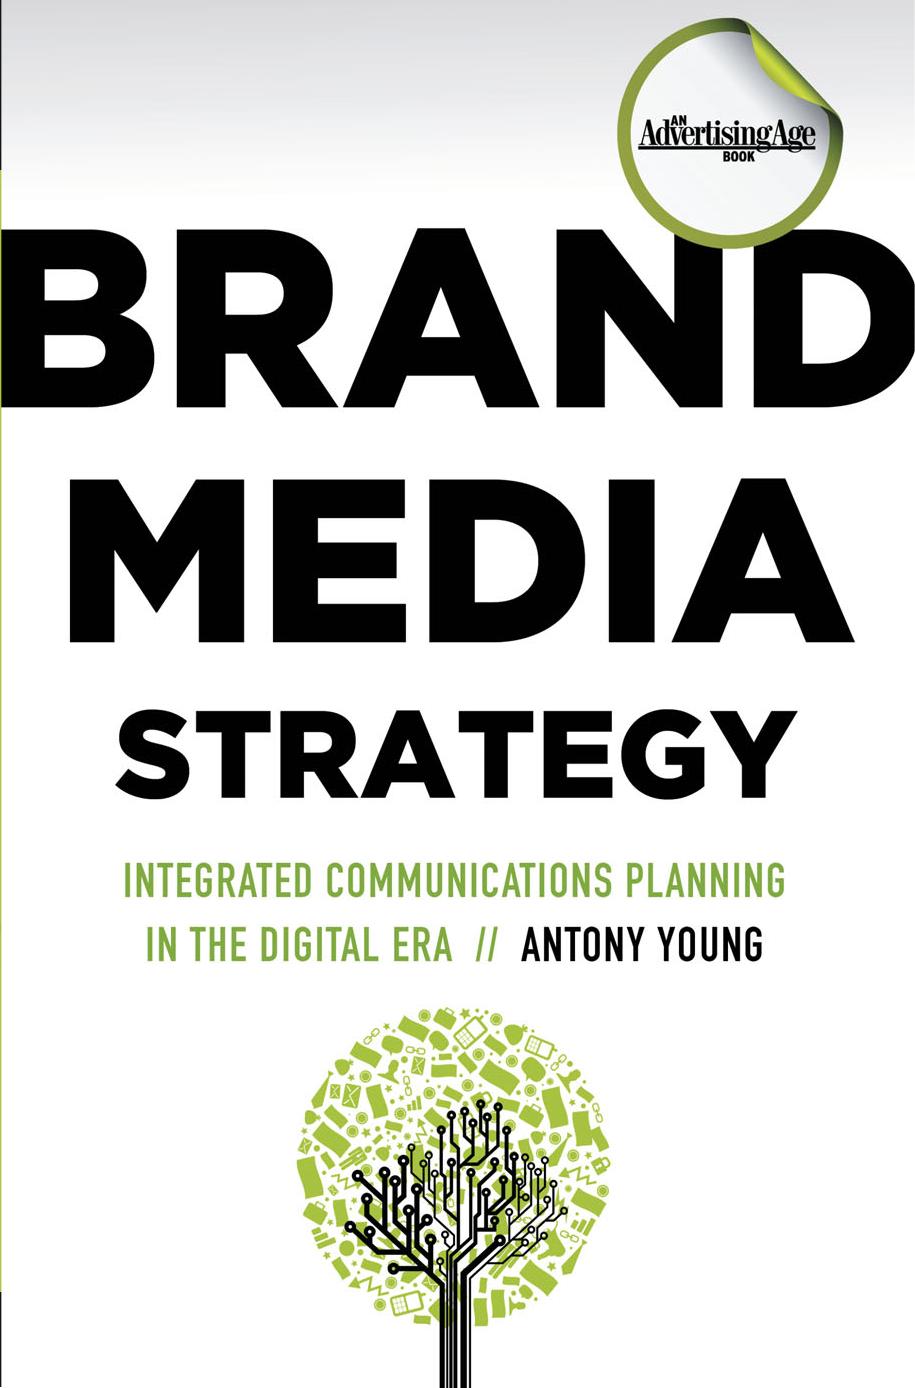 Brand Media Strategy Integrated Communications Planning in the Digital Era 2014